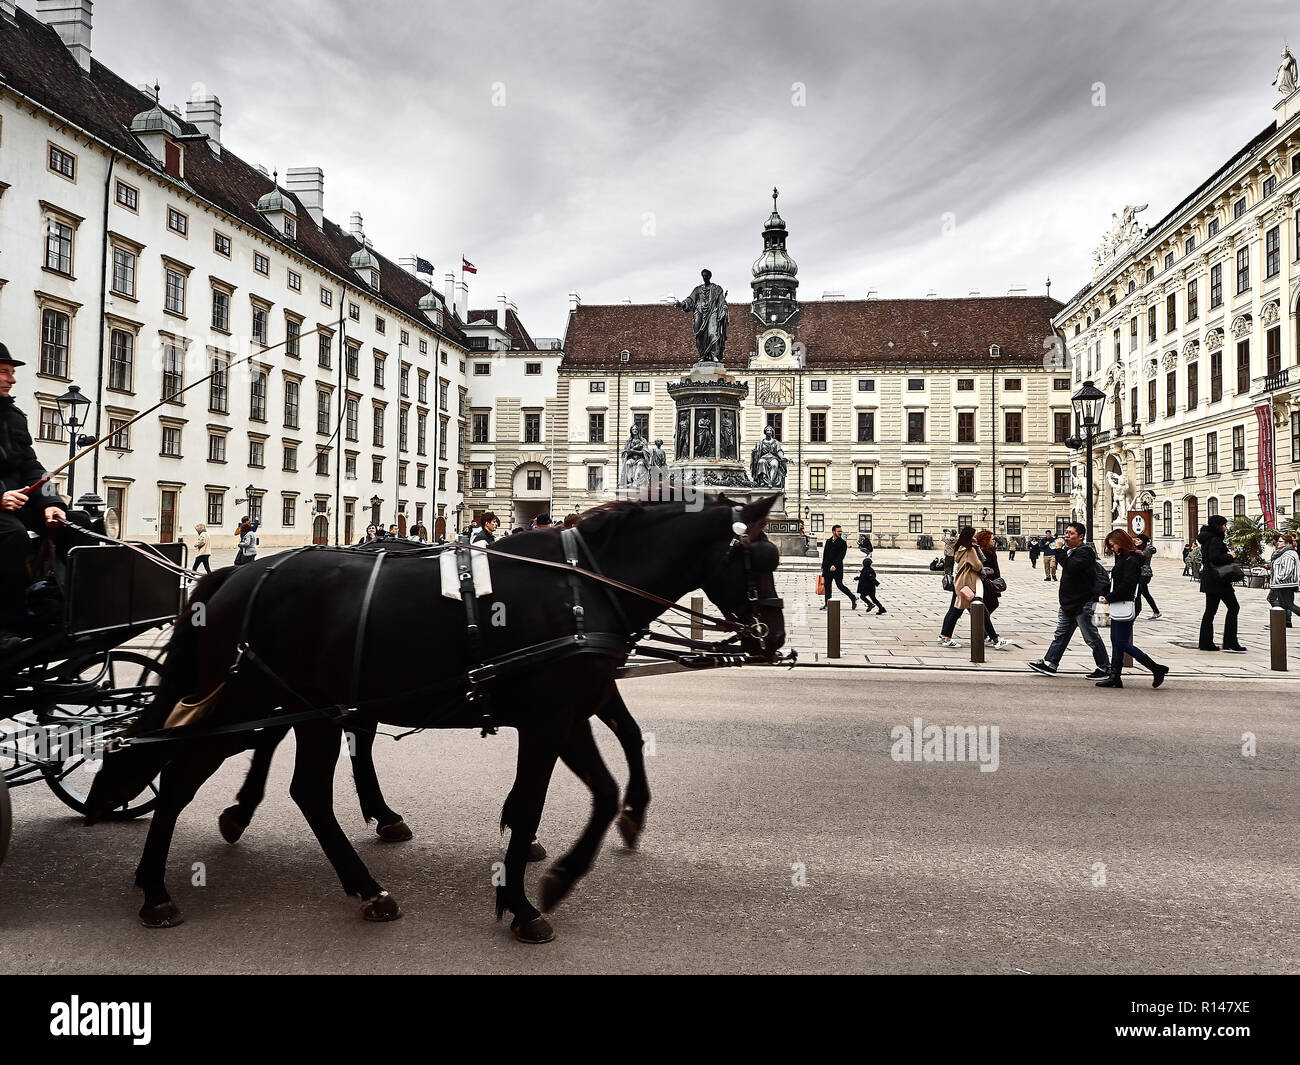 Vienna, Austria - November 1, 2018 - A horse-drawn carriage passing inside the Hofburg palace. People are visiting the palace Stock Photo